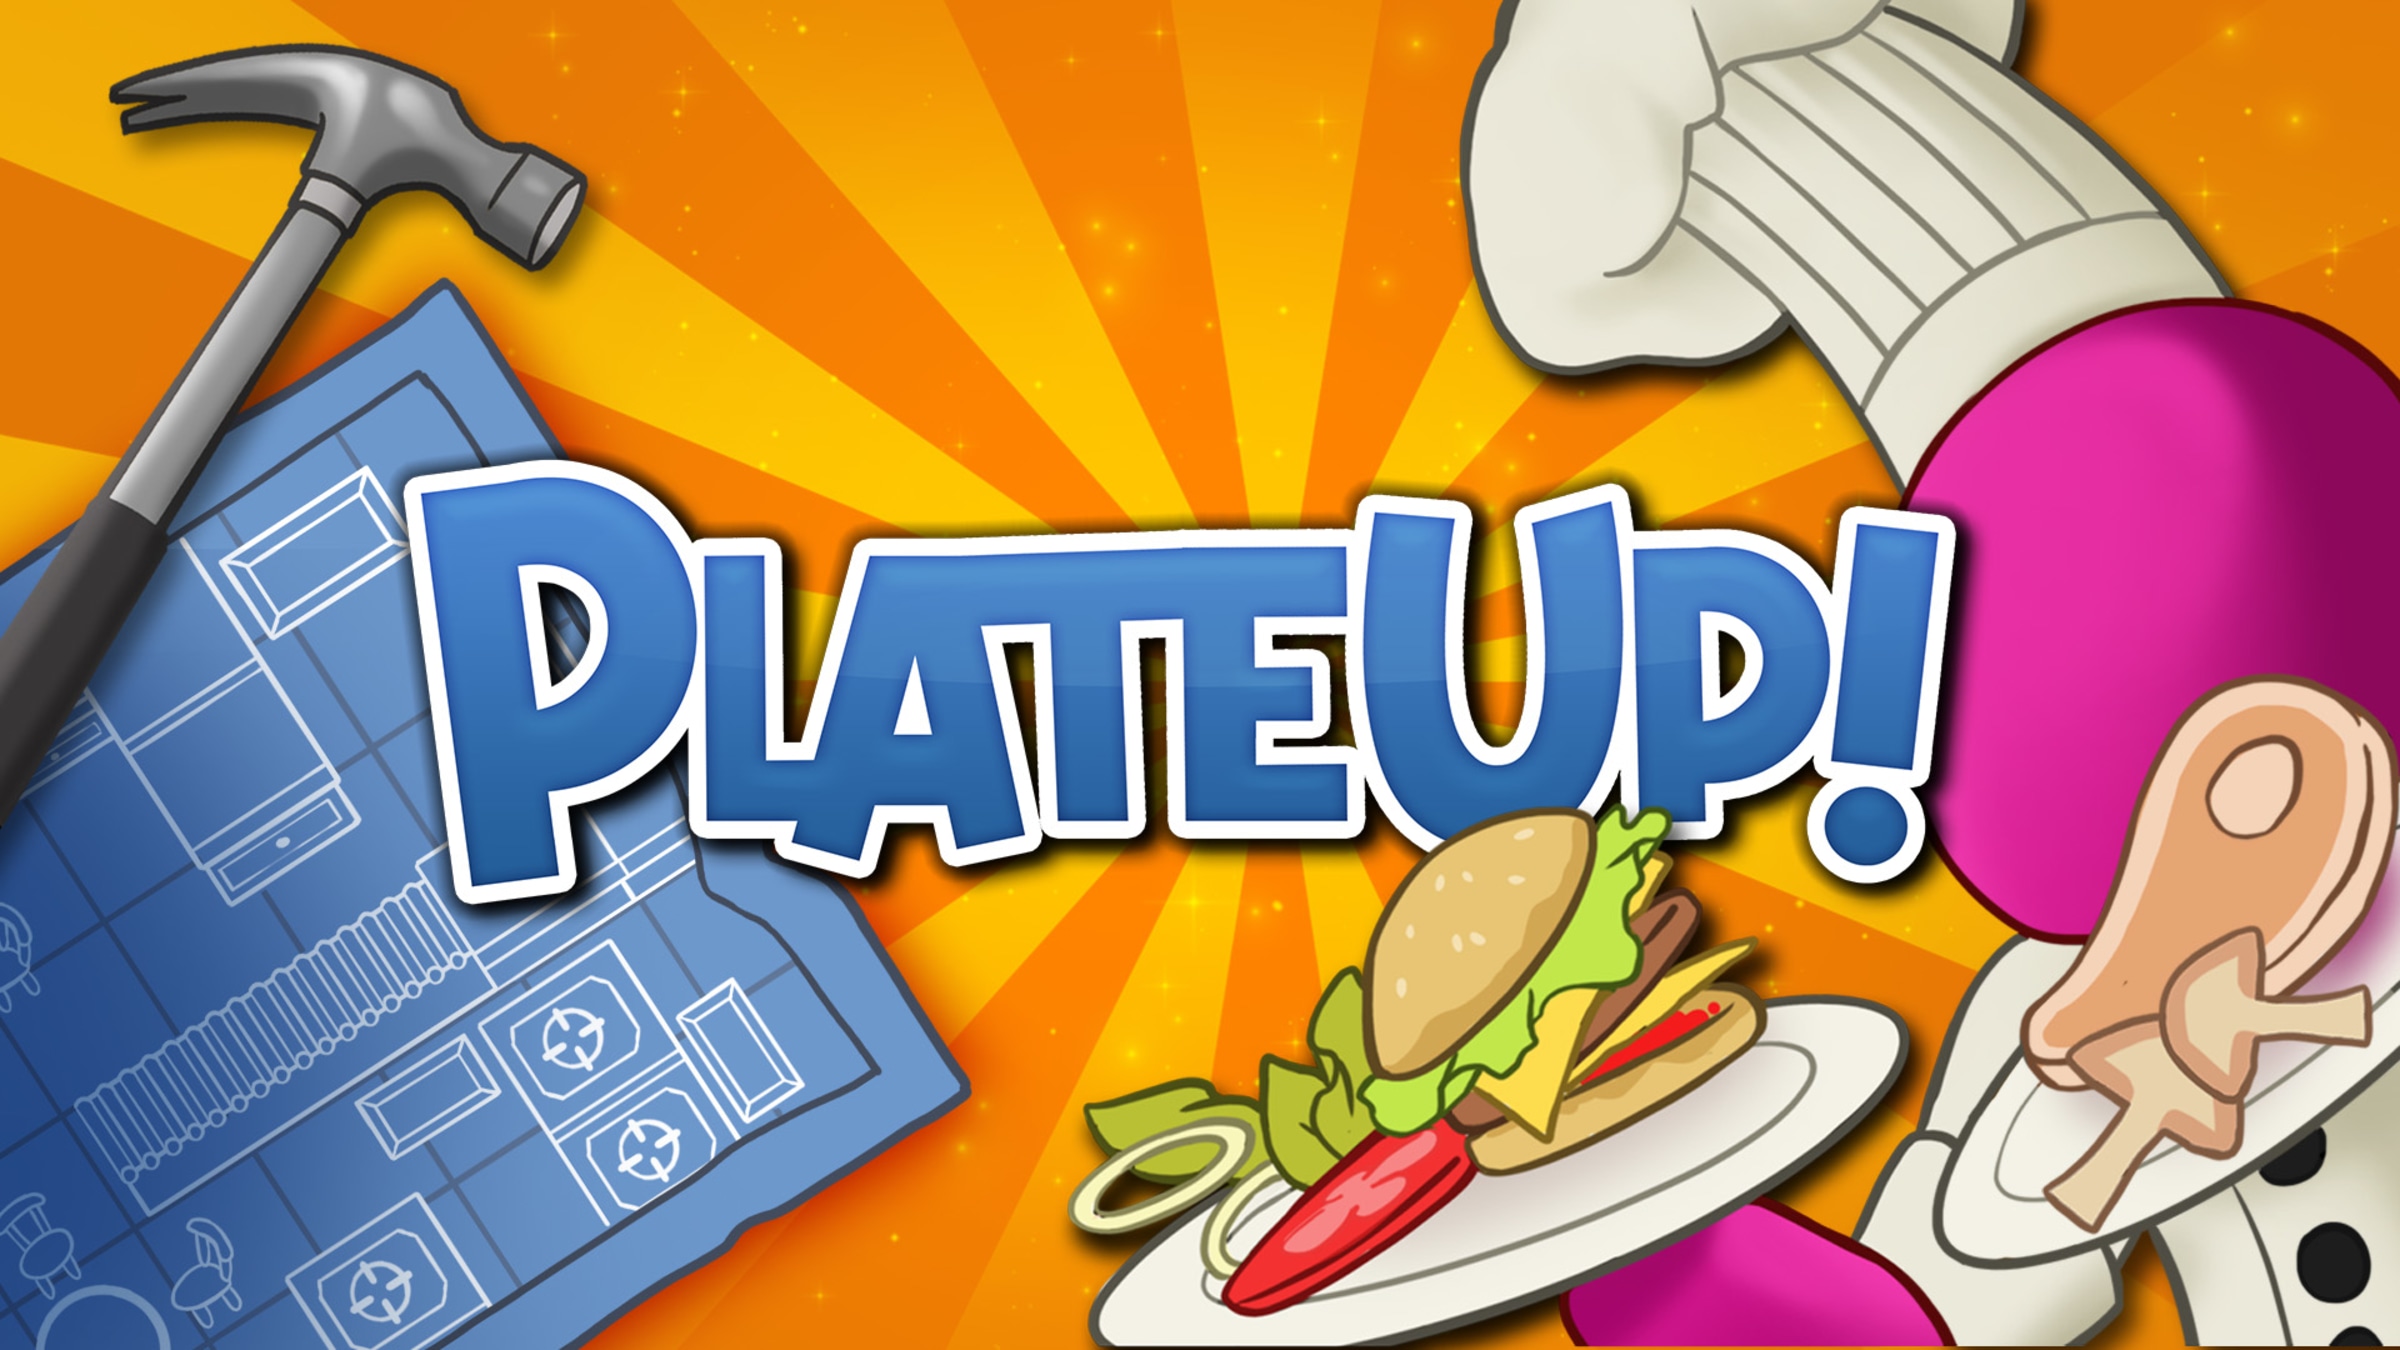 PlateUp Full Version Free Download